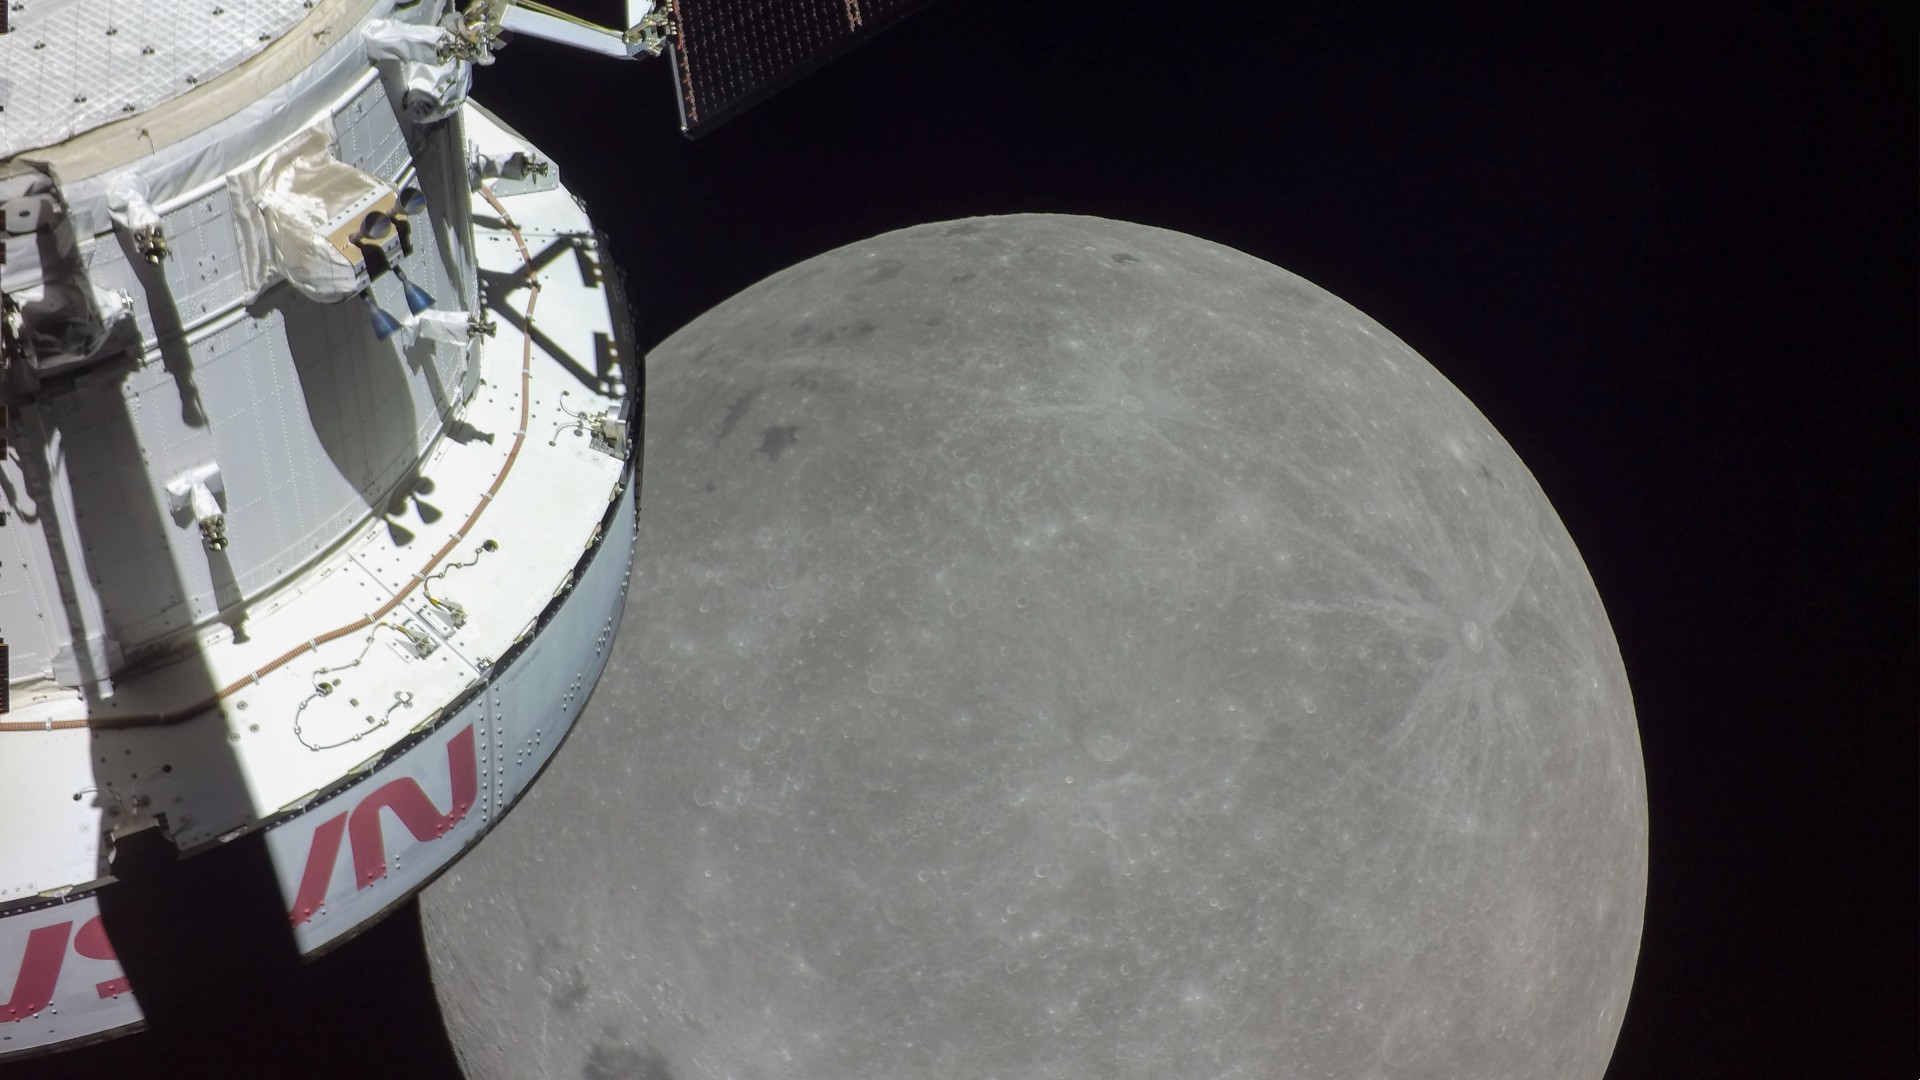 the moon, as seen from lunar orbit by nasa's artemis 1 orion spacecraft. part of the capsule is visible in the foreground.